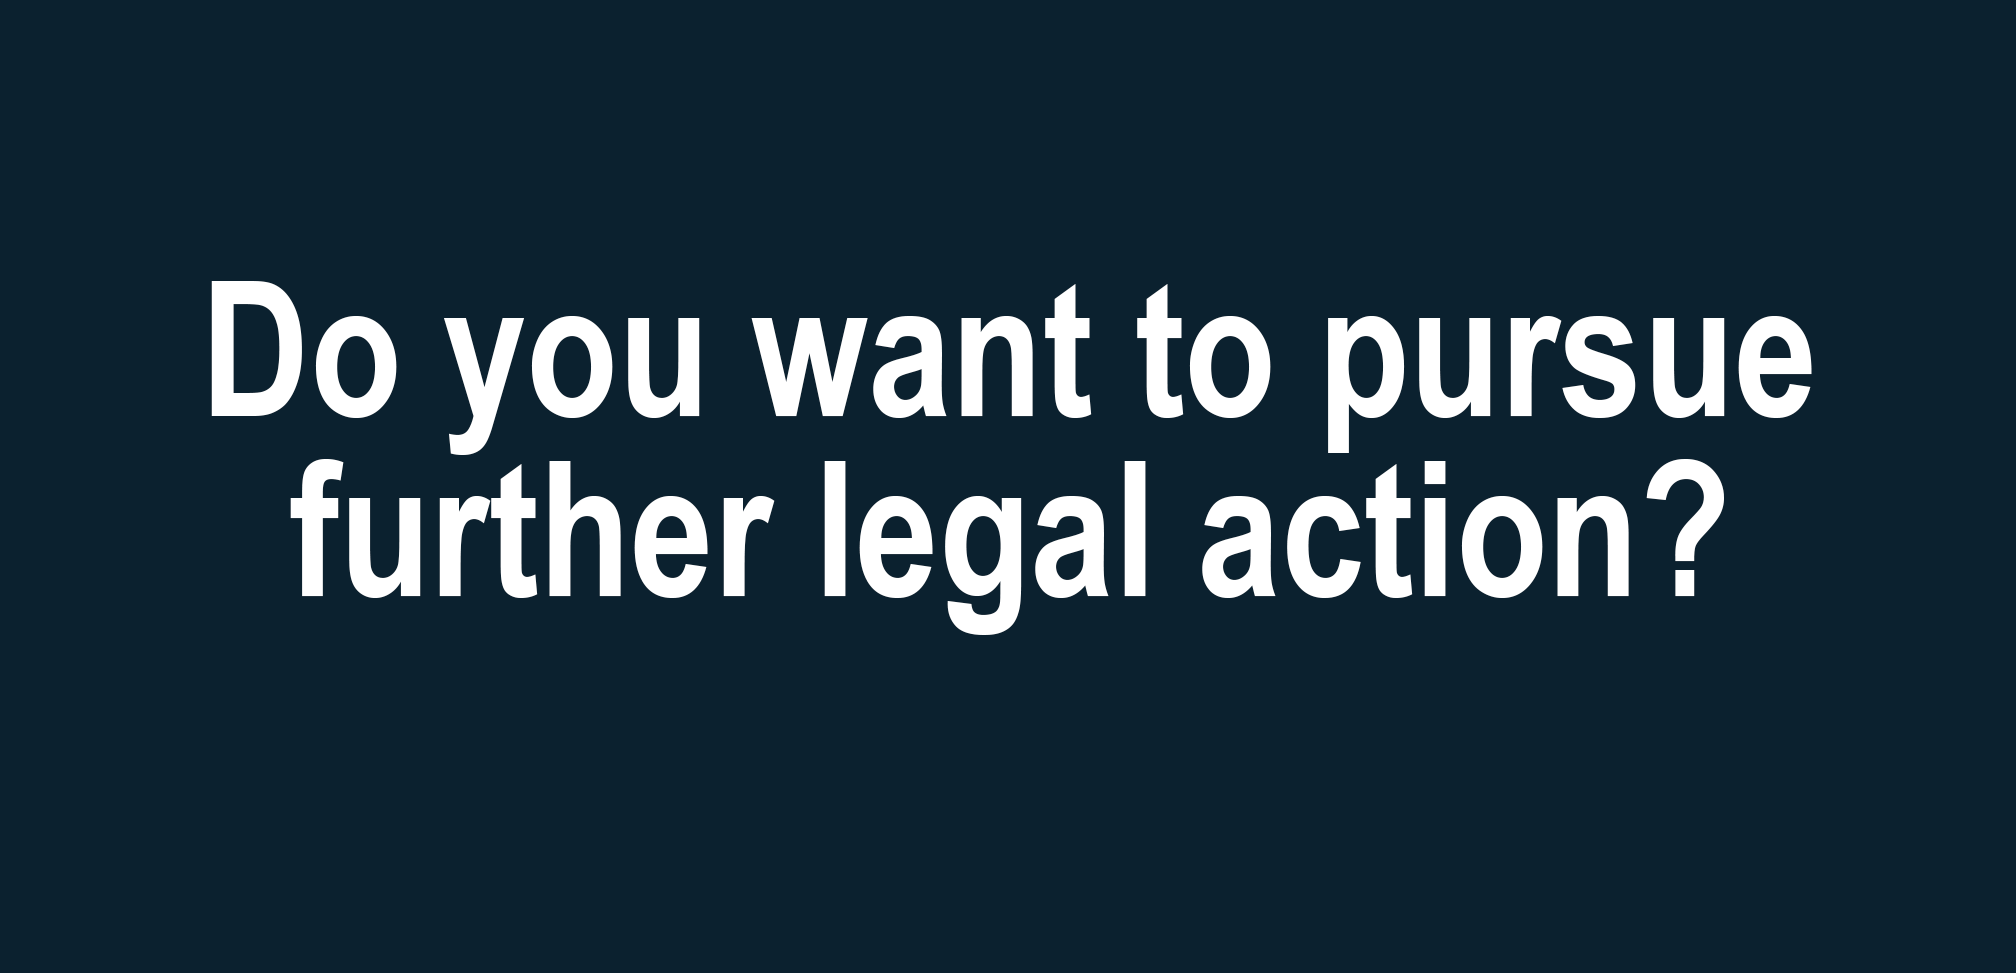 Do you want to pursue further legal action?